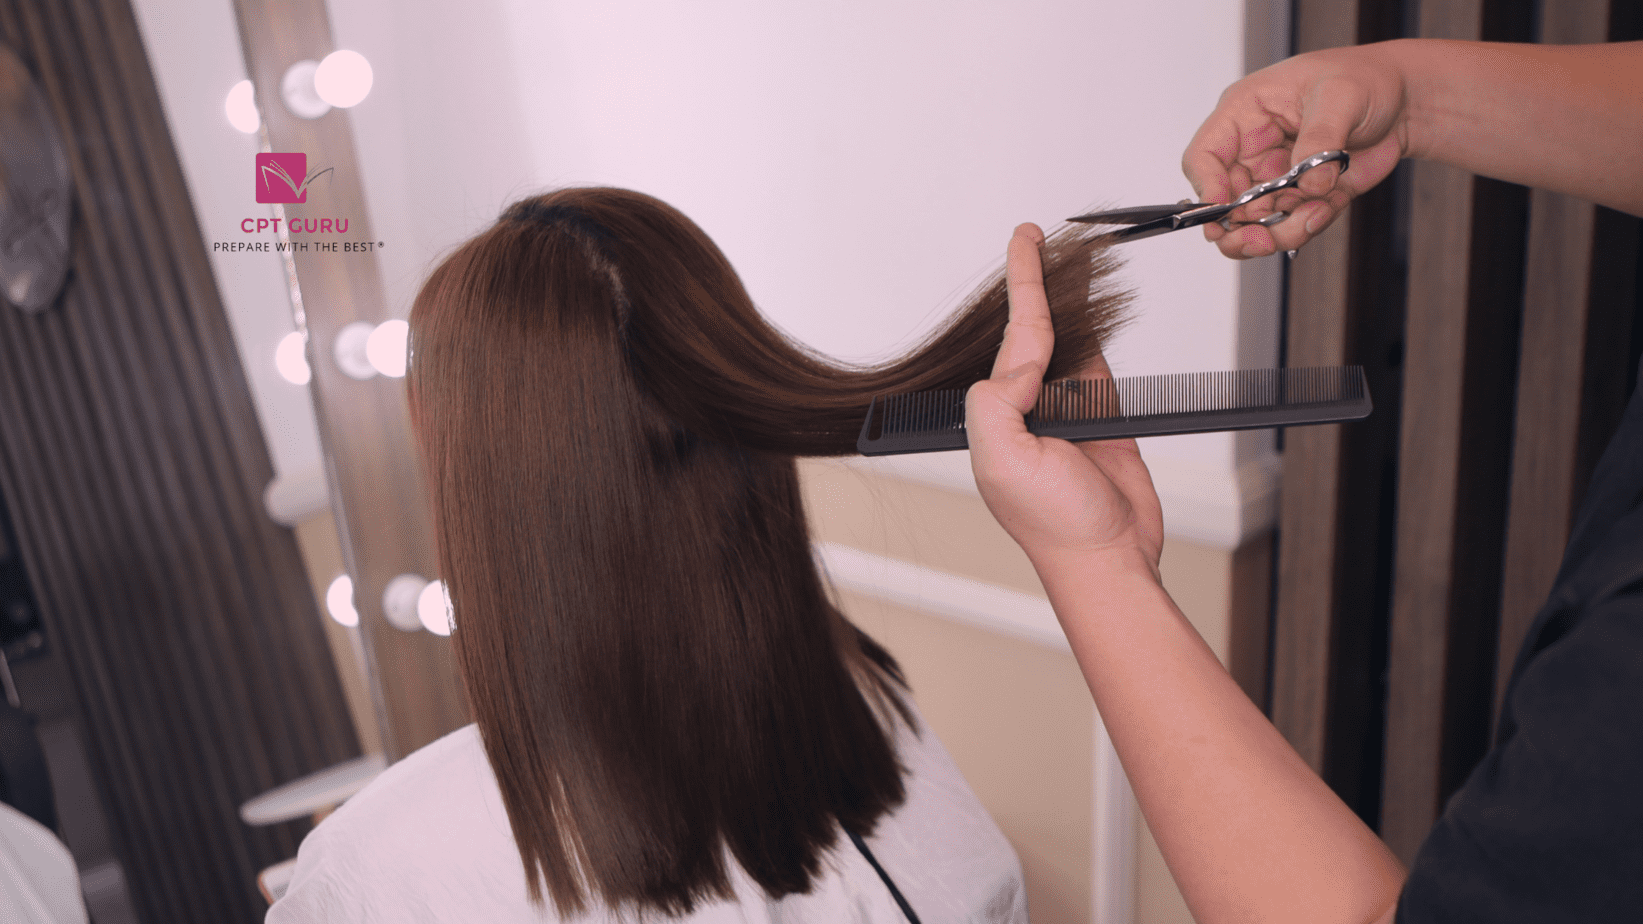 Can a cosmetologist become a barber?